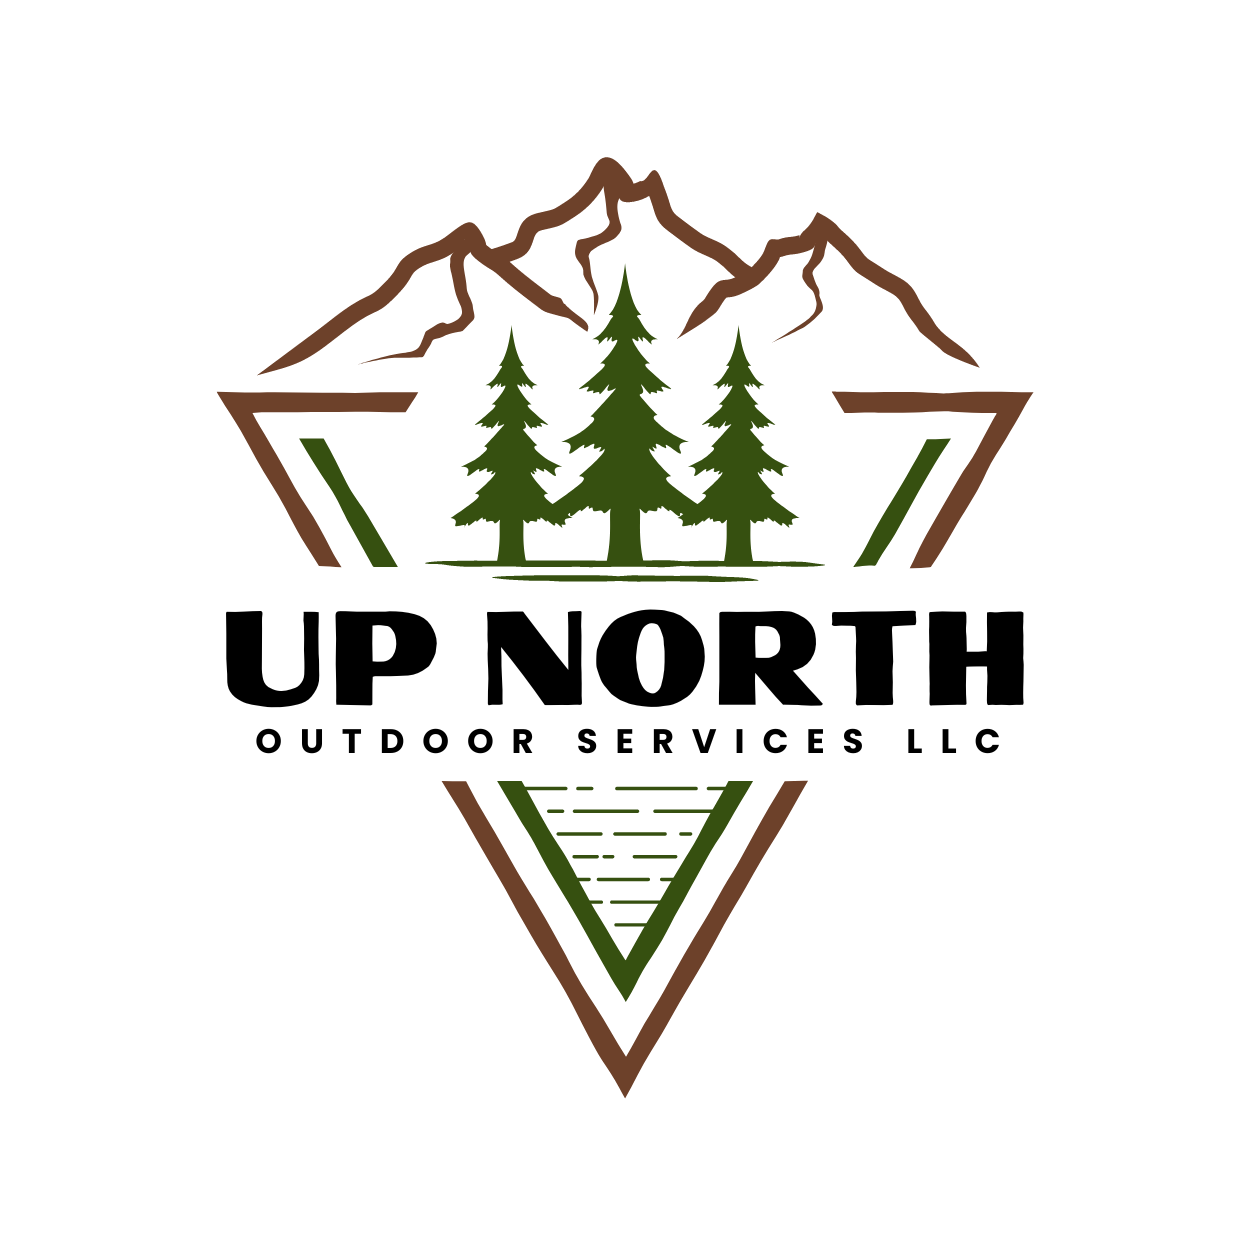 UP NORTH OUTDOOR SERVICES, LLC Logo